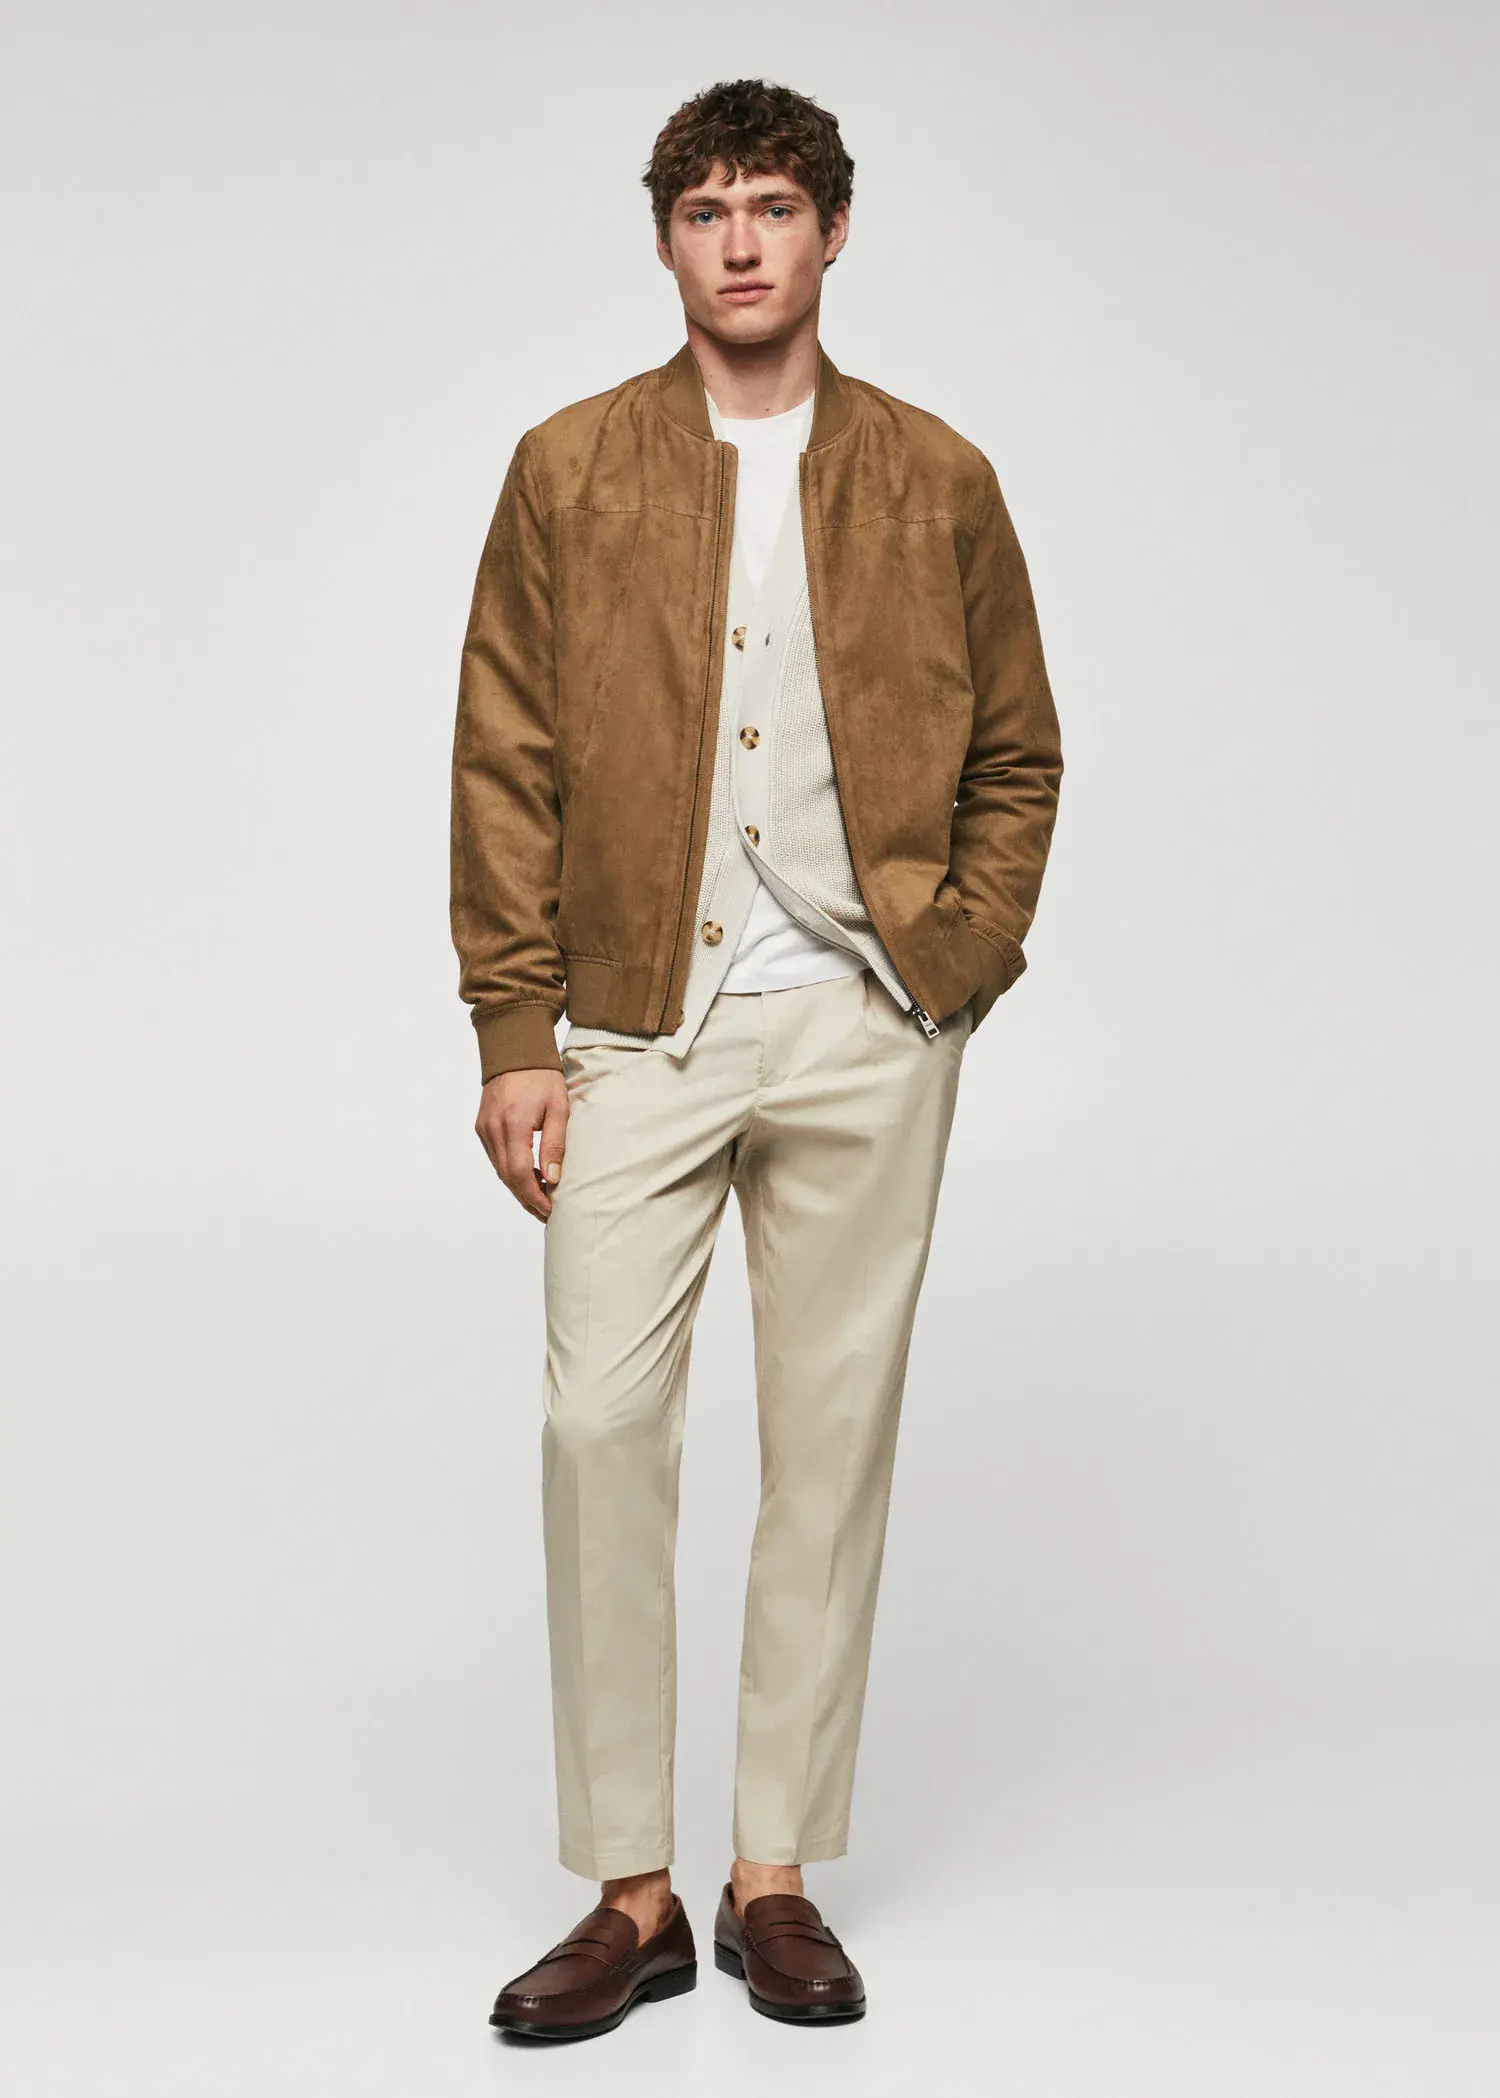 Mango Suede-effect bomber jacket. a man wearing a brown jacket and white shirt. 